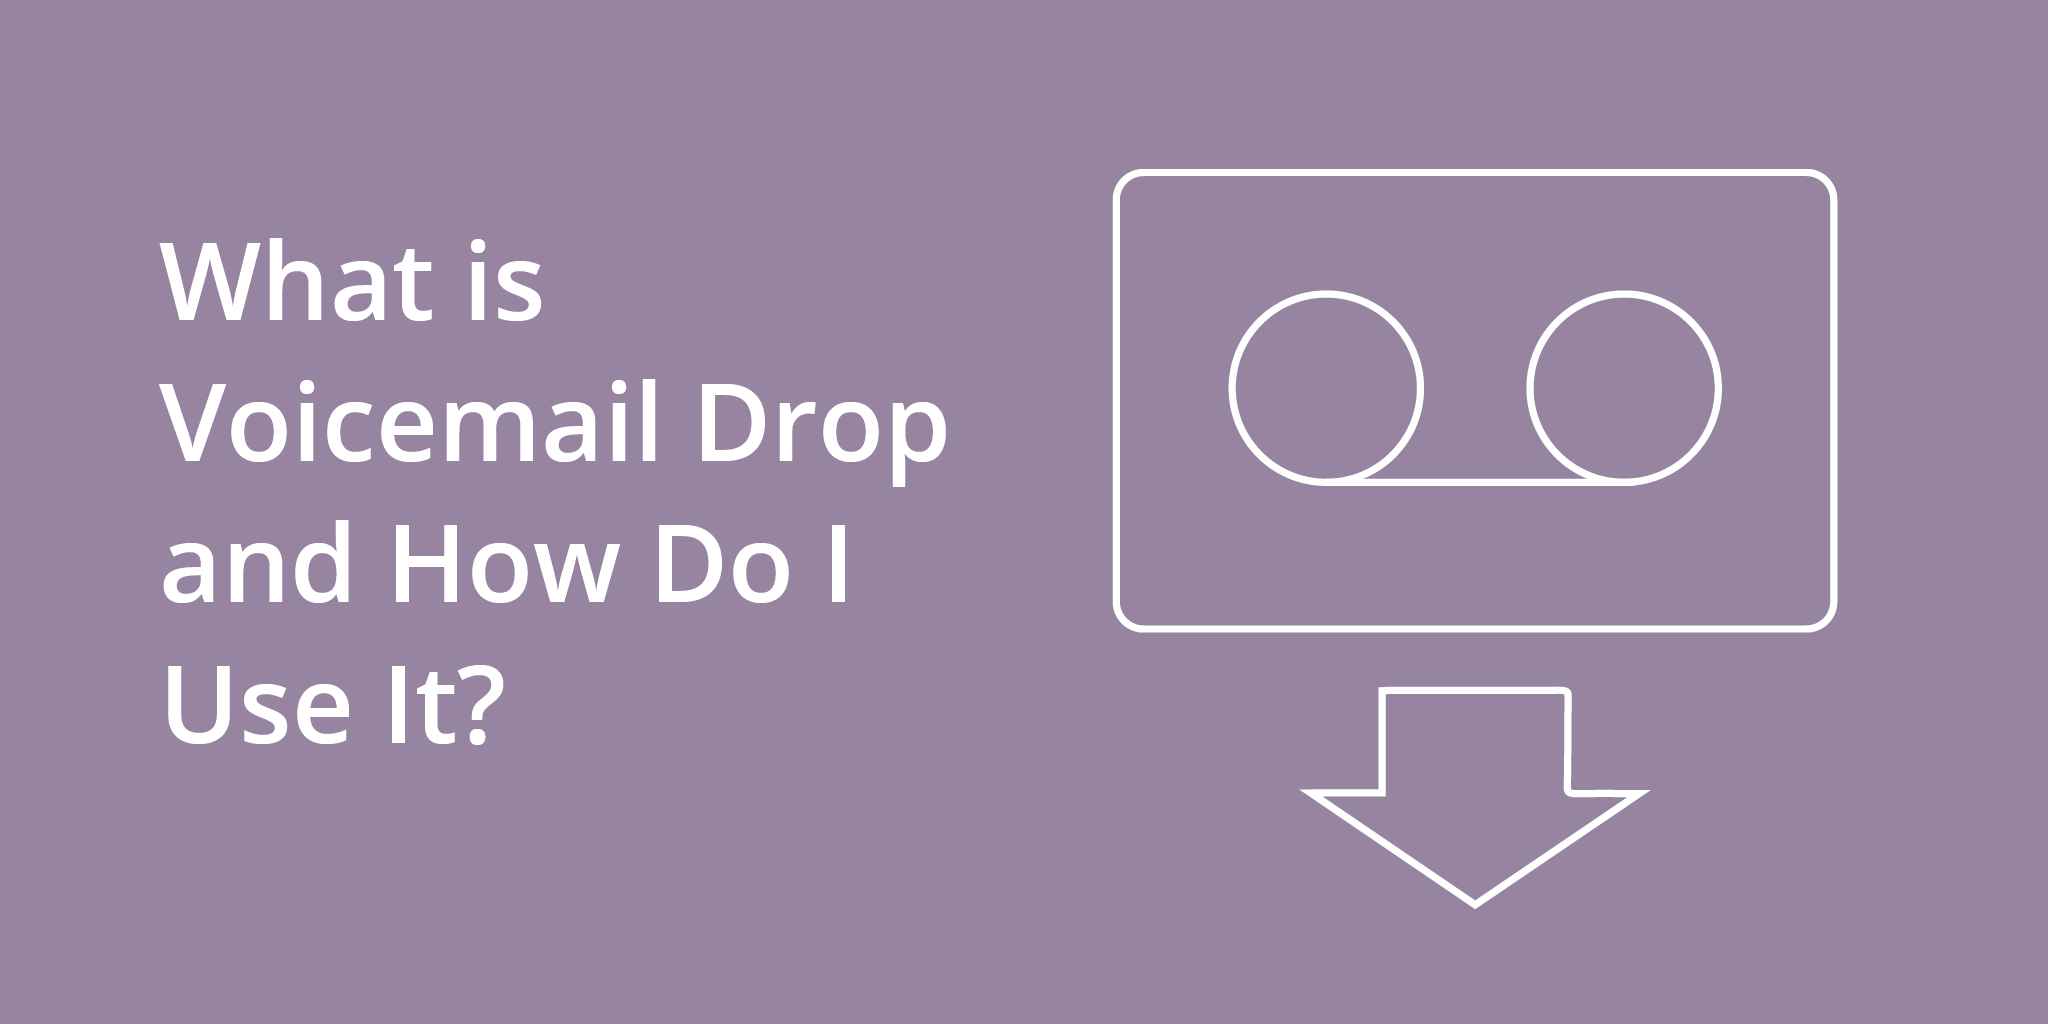 What is Voicemail Drop and How Do I Use It? | Telephones for business